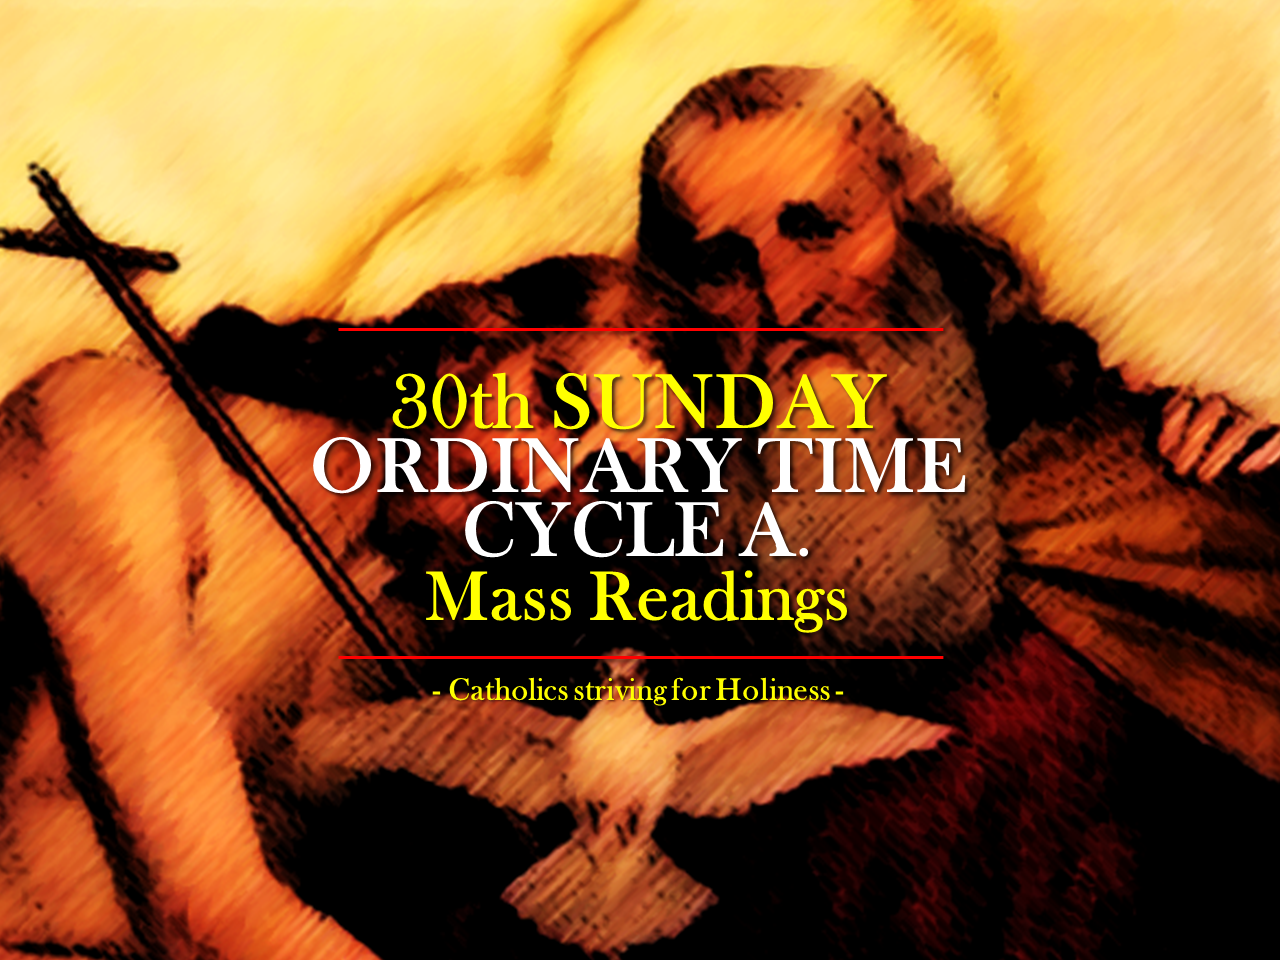 30th Sunday of Ordinary Time. Mass readings 1